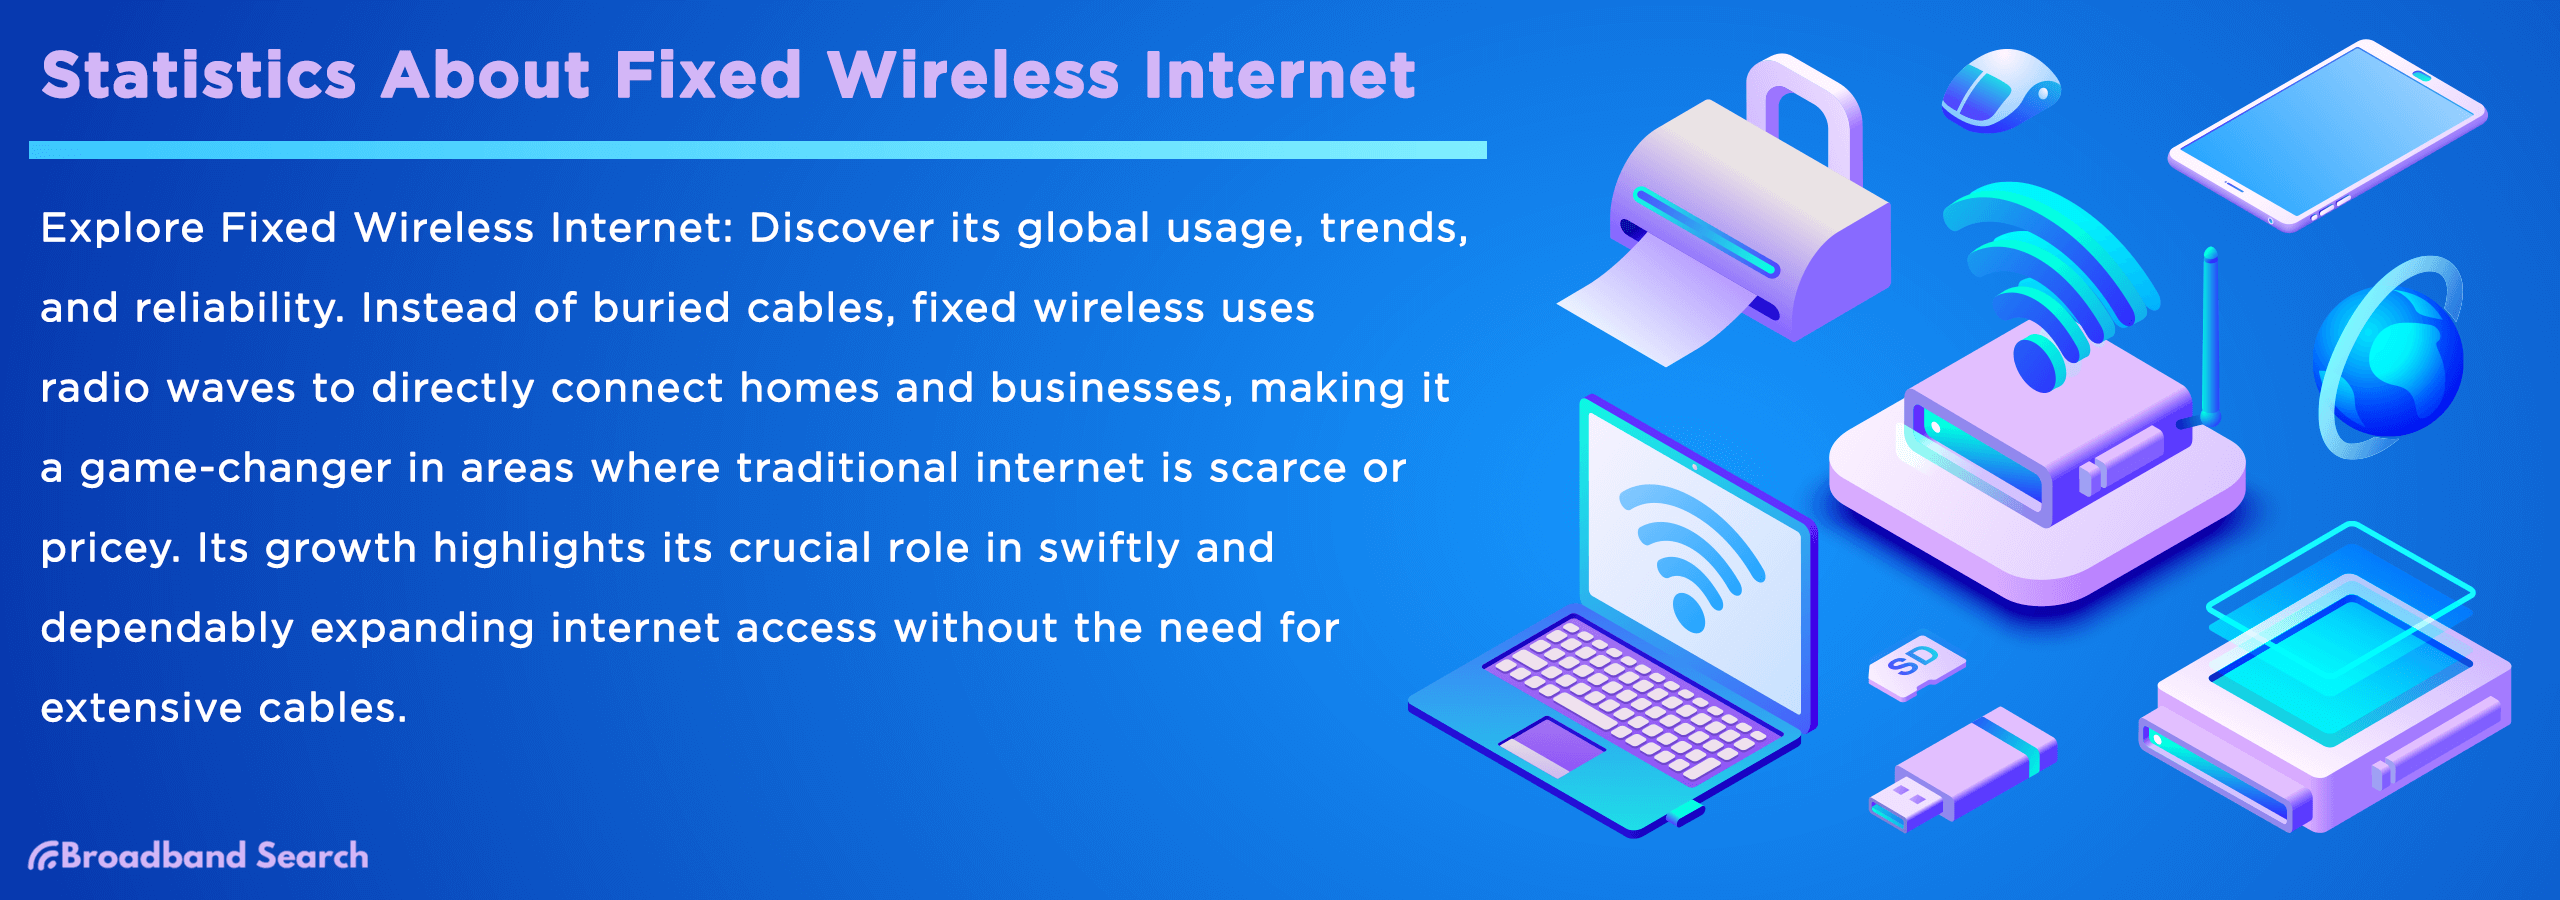 Key Statistics You Should Know About Fixed Wireless Internet